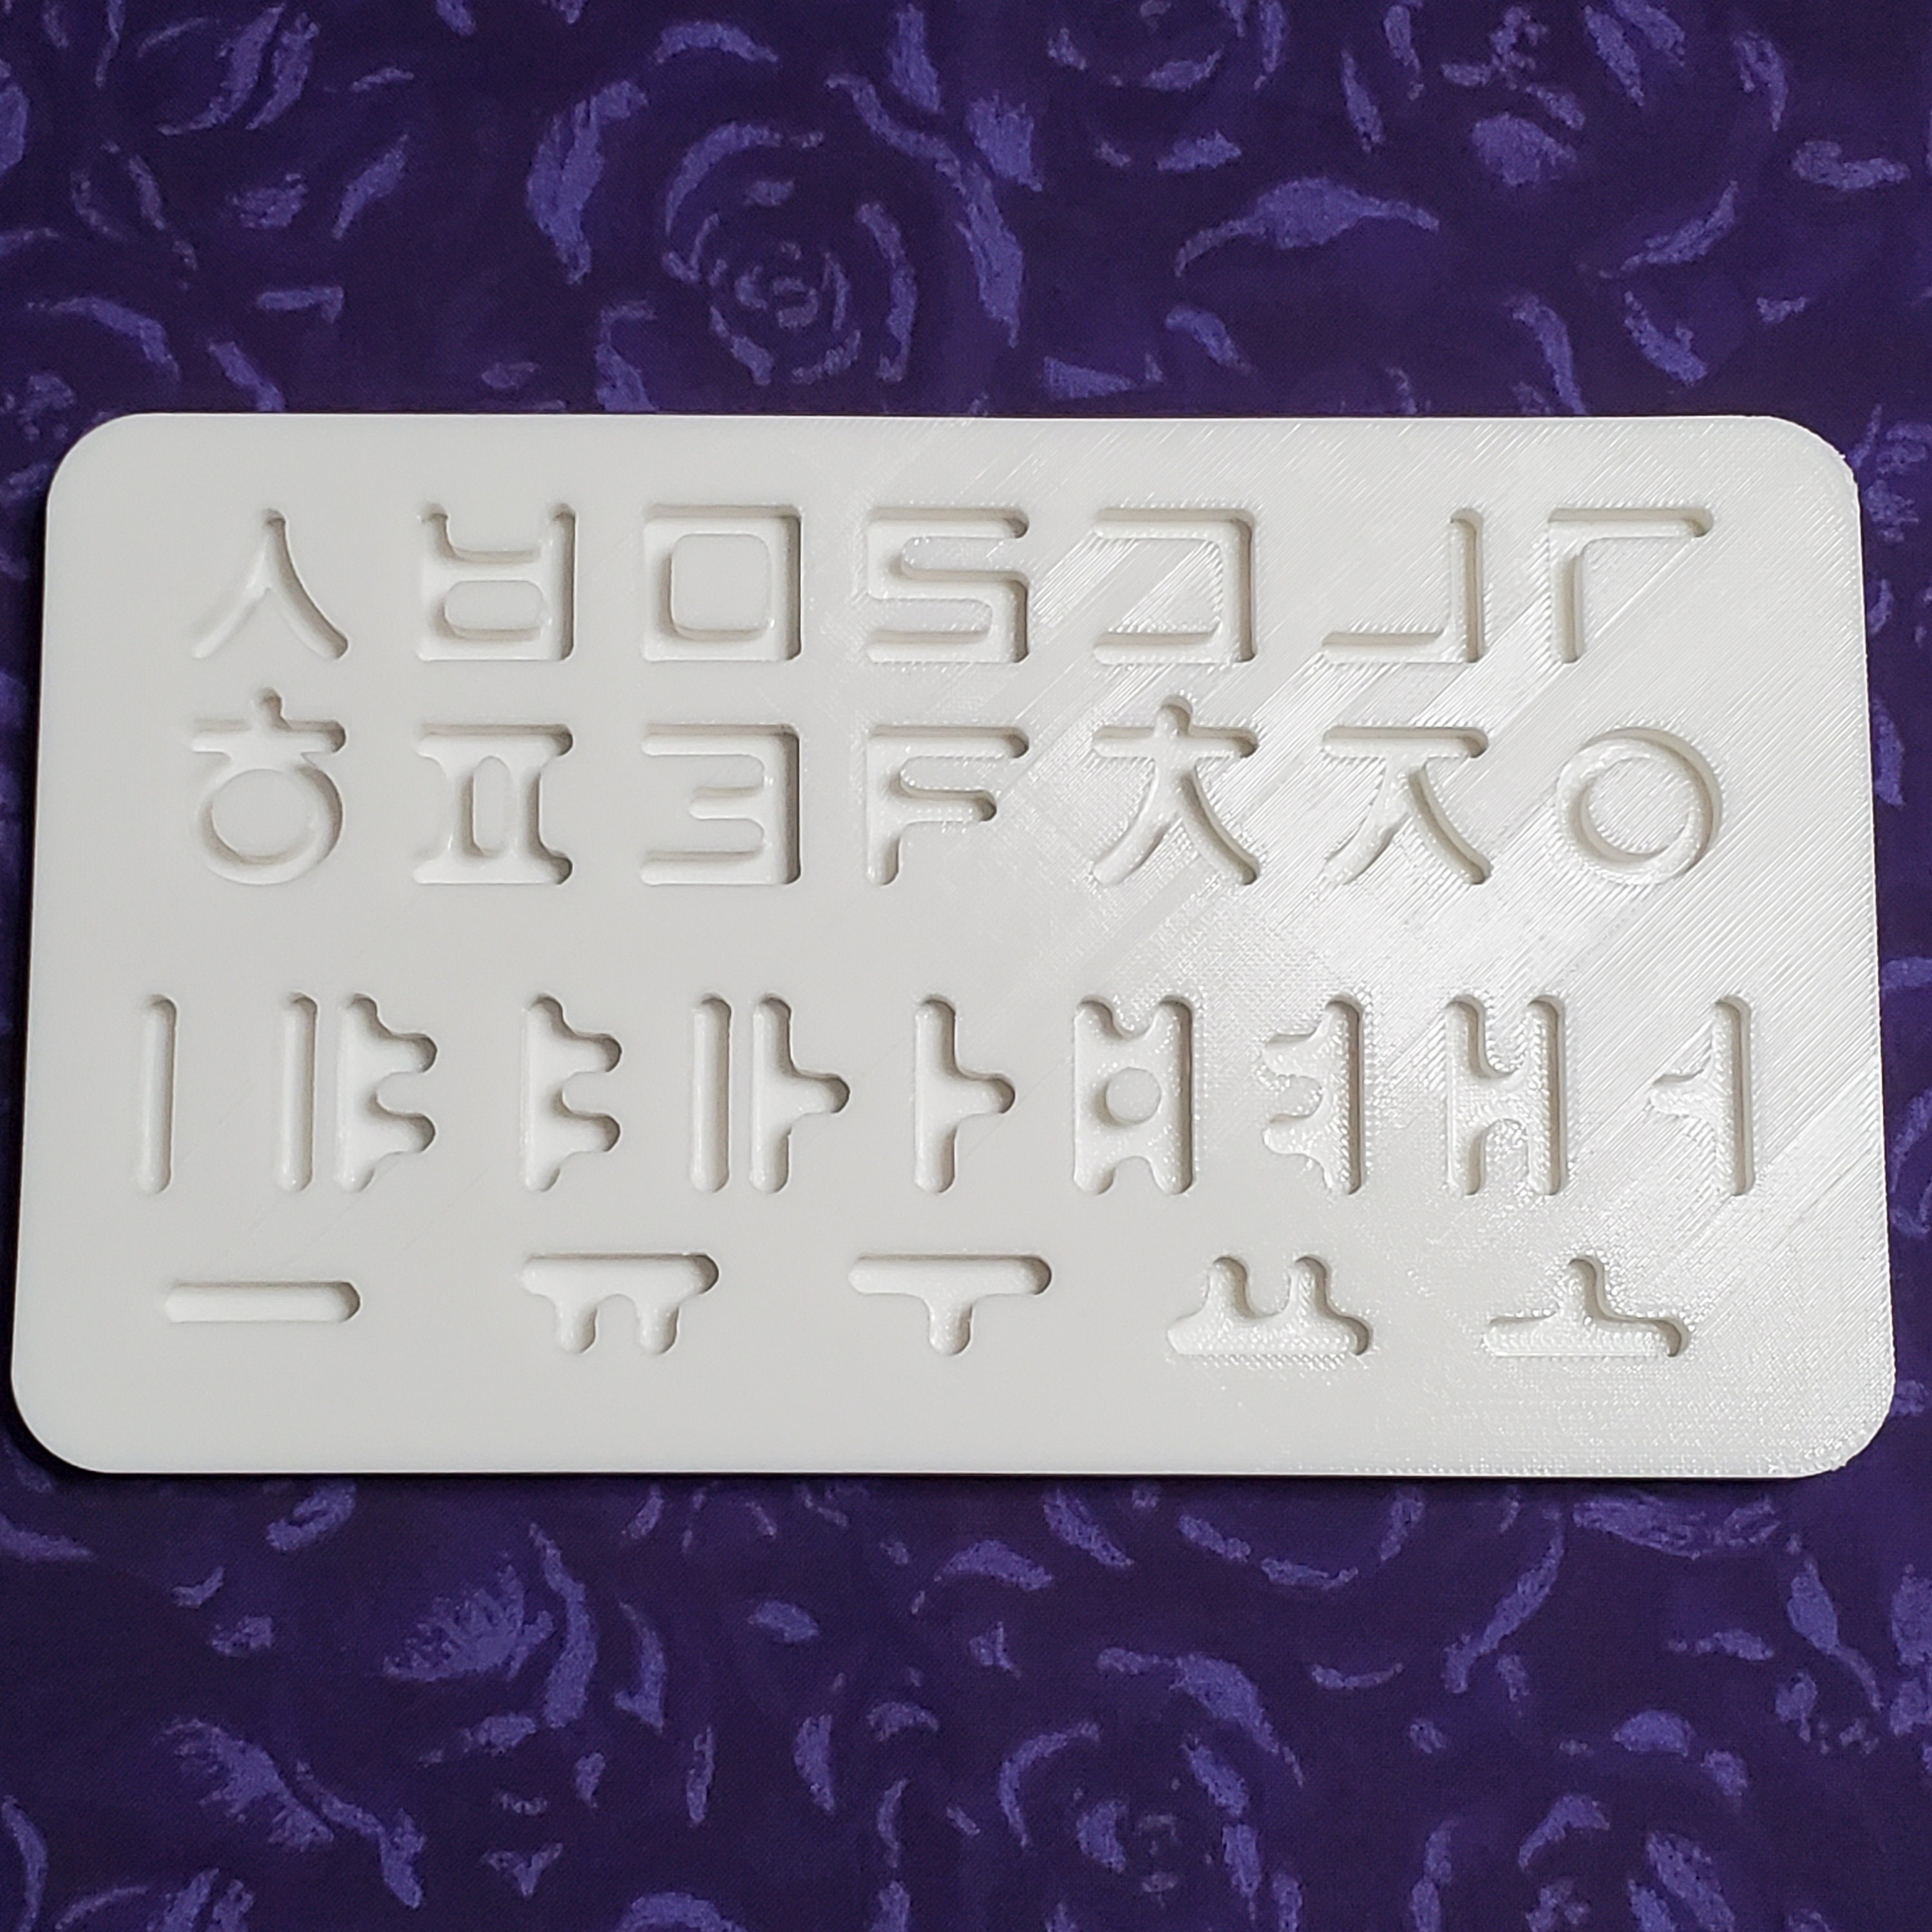 LET'S RESIN Reversed Alphabet Mold for Resin, Resin Letter Keychain Molds  With Hole, Alphabet Resin Molds Silicone With 30 Jump Rings 